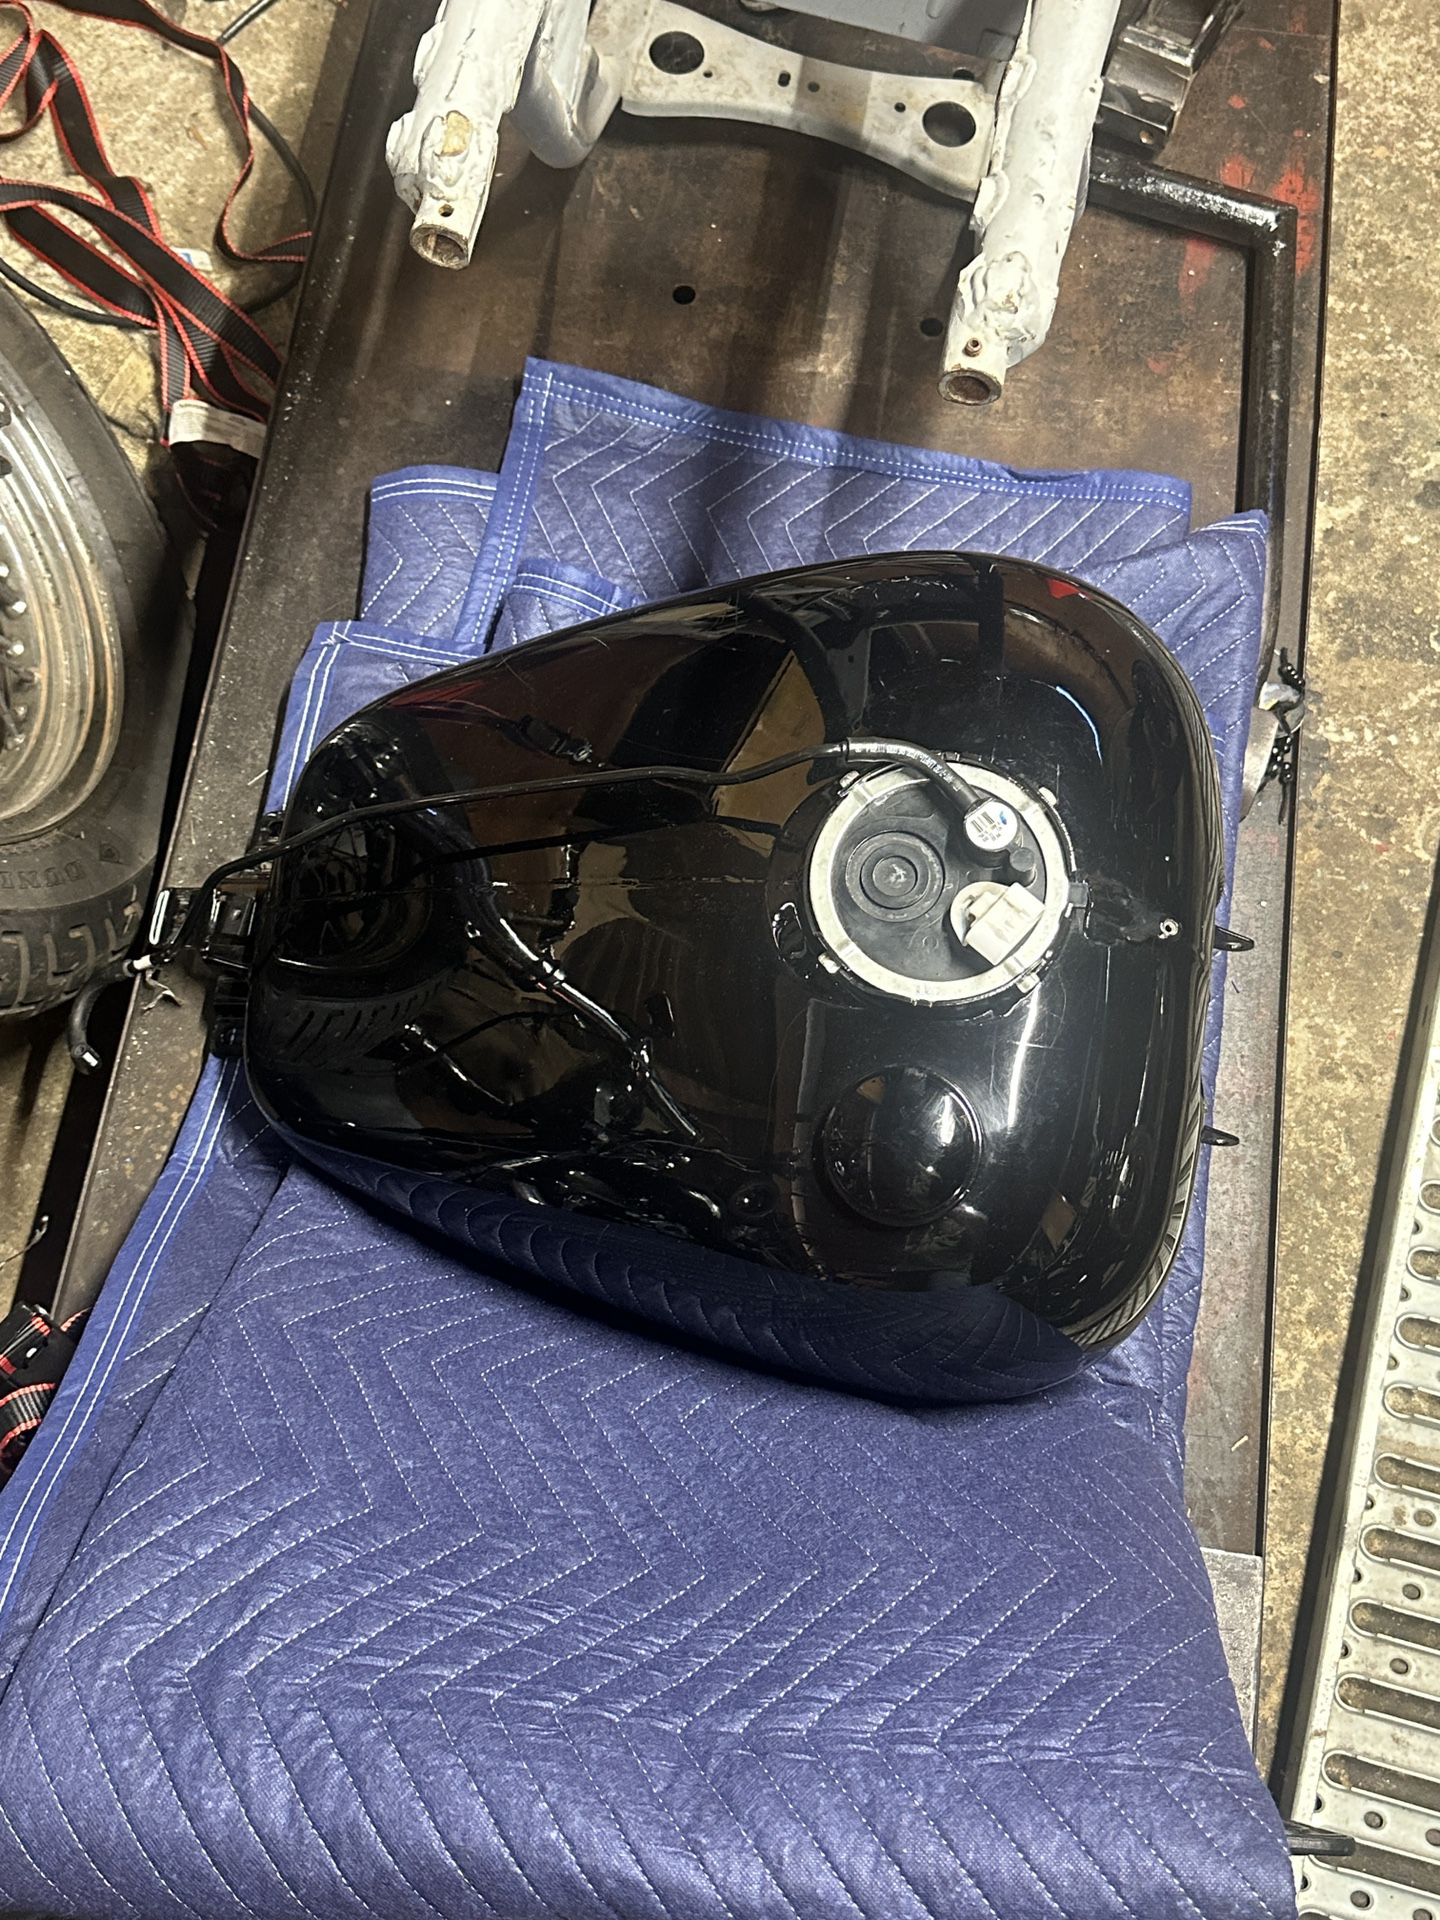 2022 street glide tank with fuel pump W/ trade for Parts.